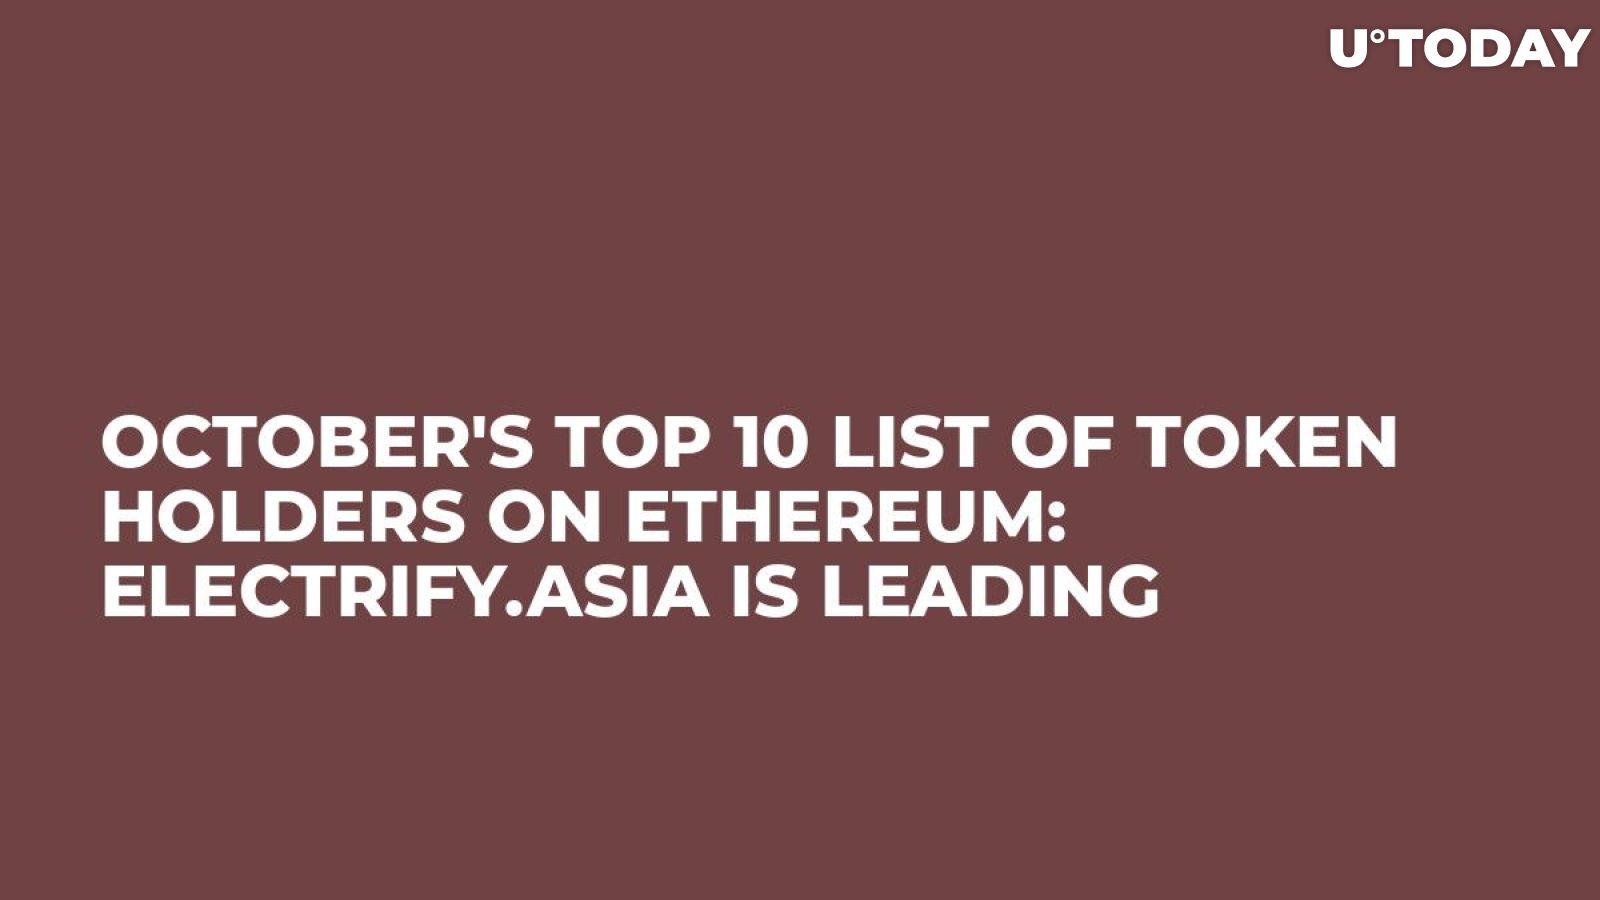 October's Top 10 List of Token Holders on Ethereum: Electrify.Asia is Leading